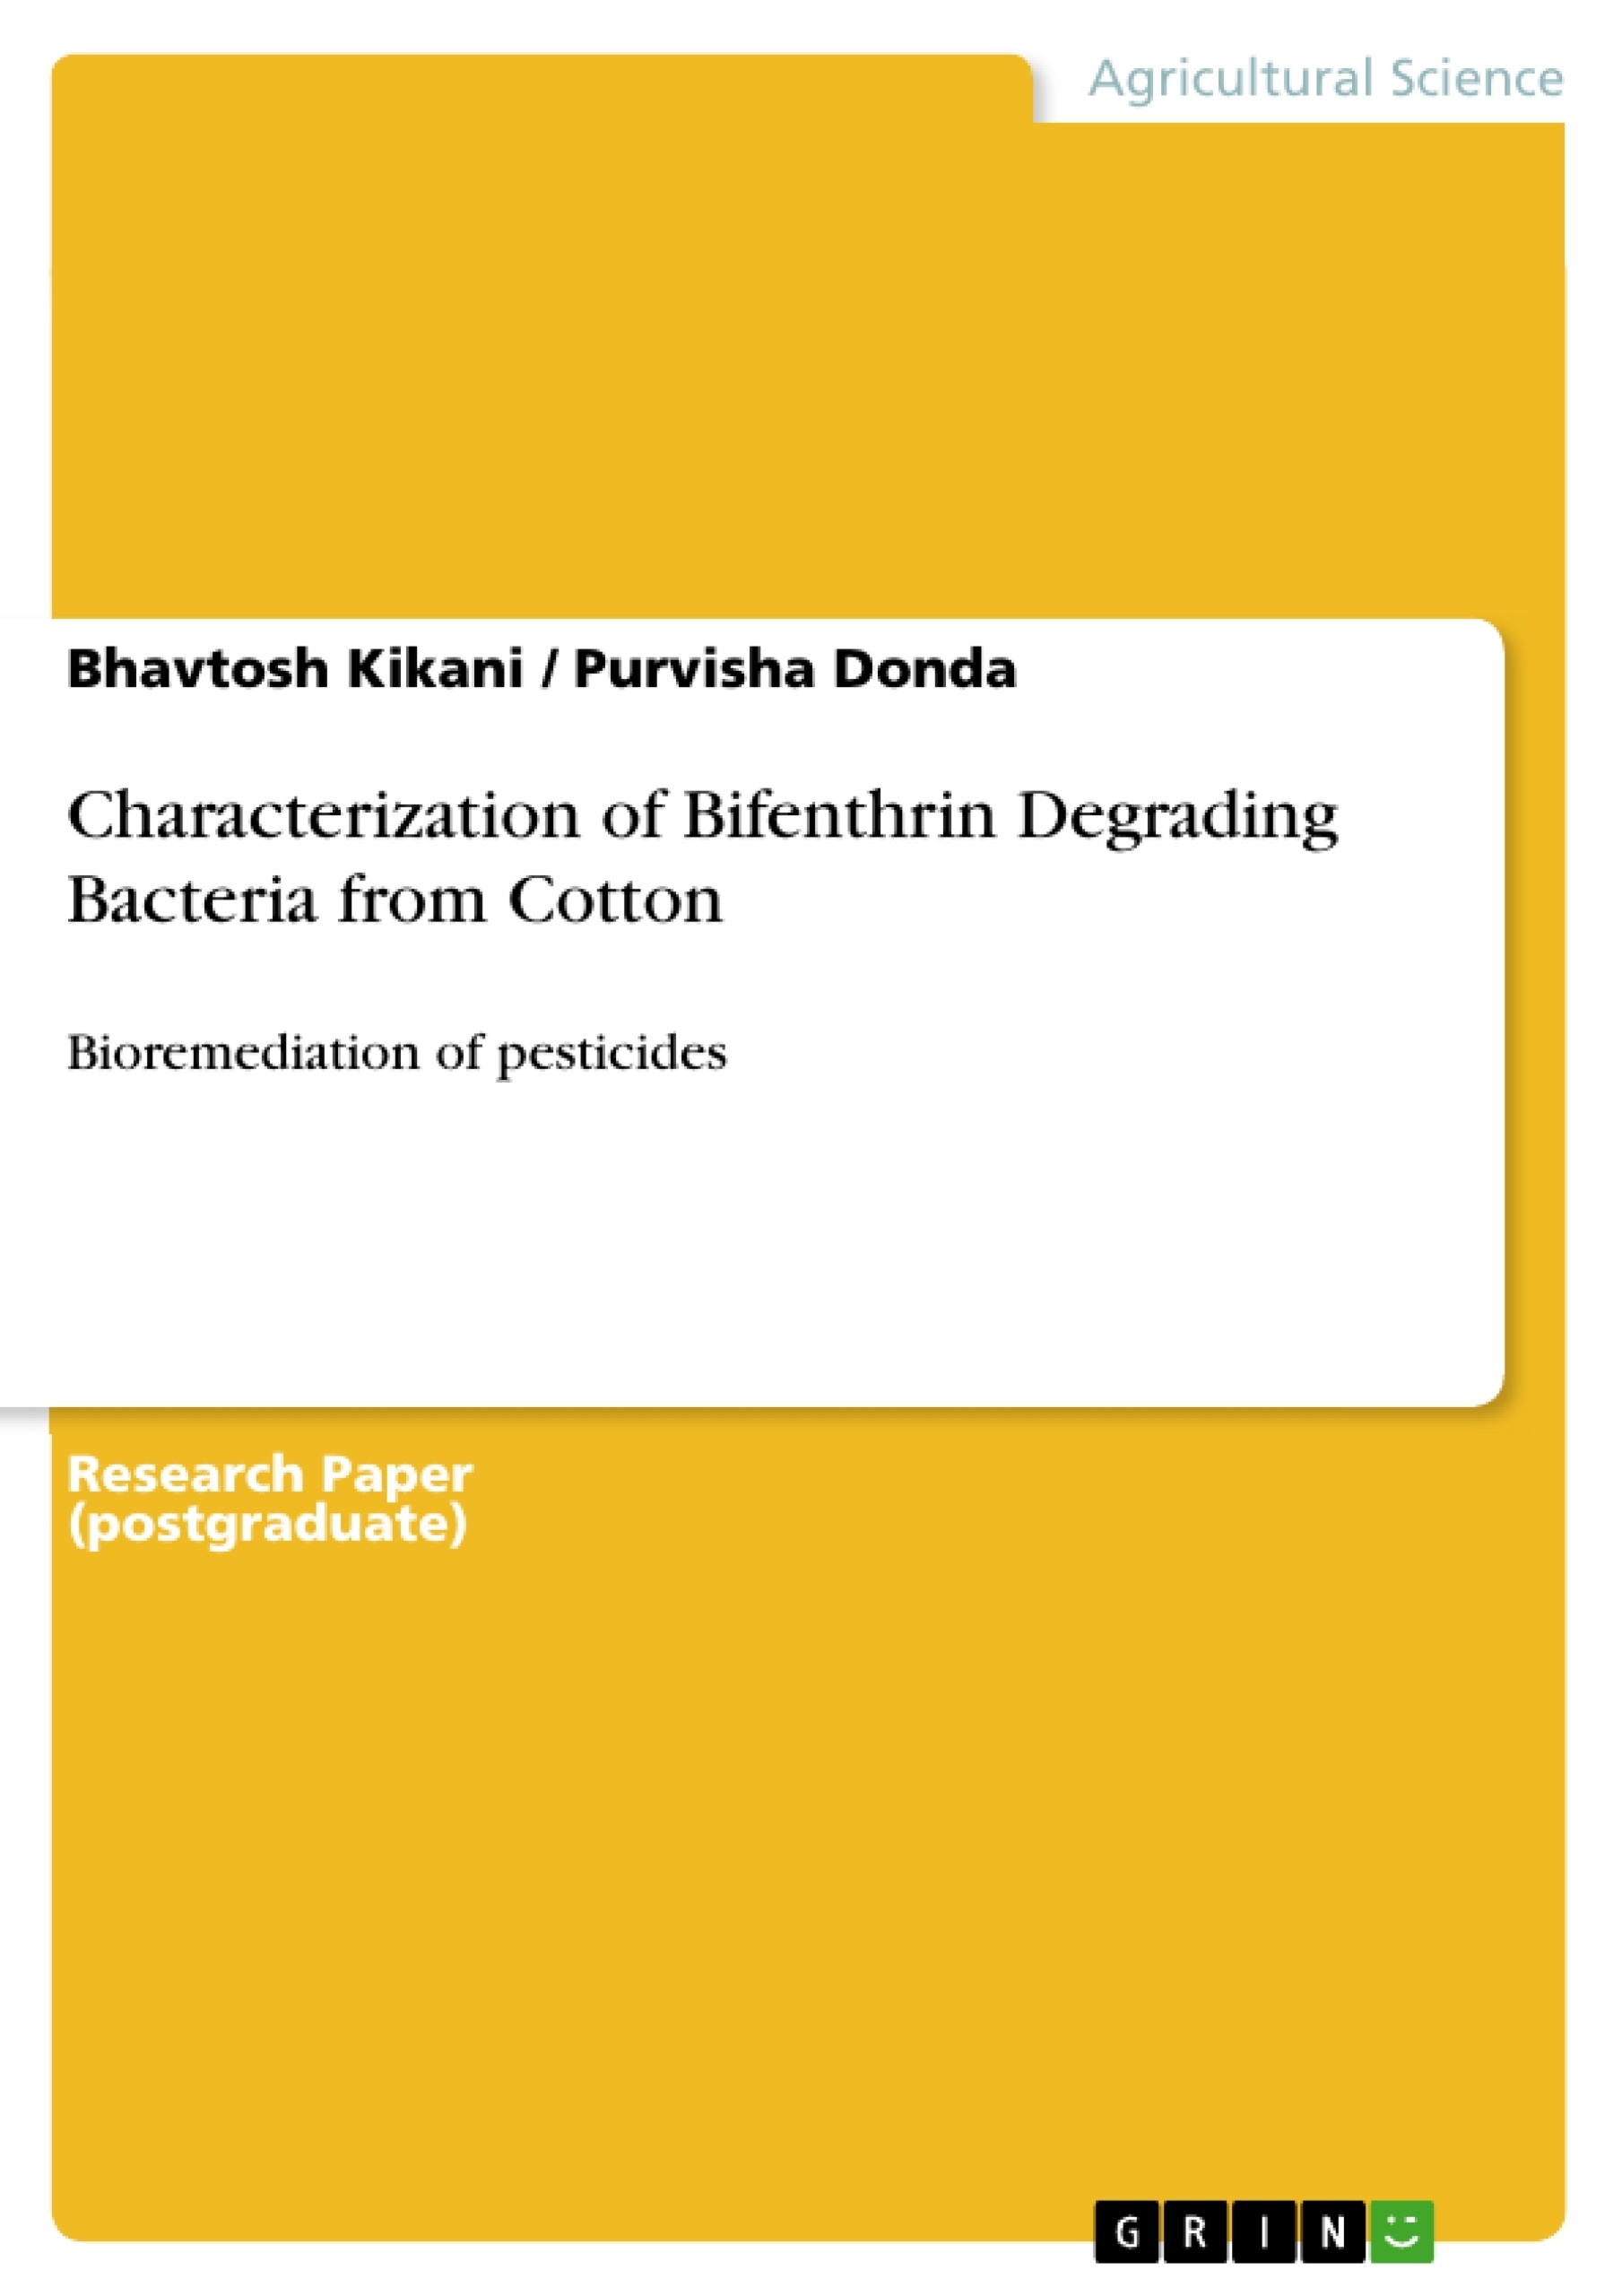 Title: Characterization of Bifenthrin Degrading Bacteria from Cotton